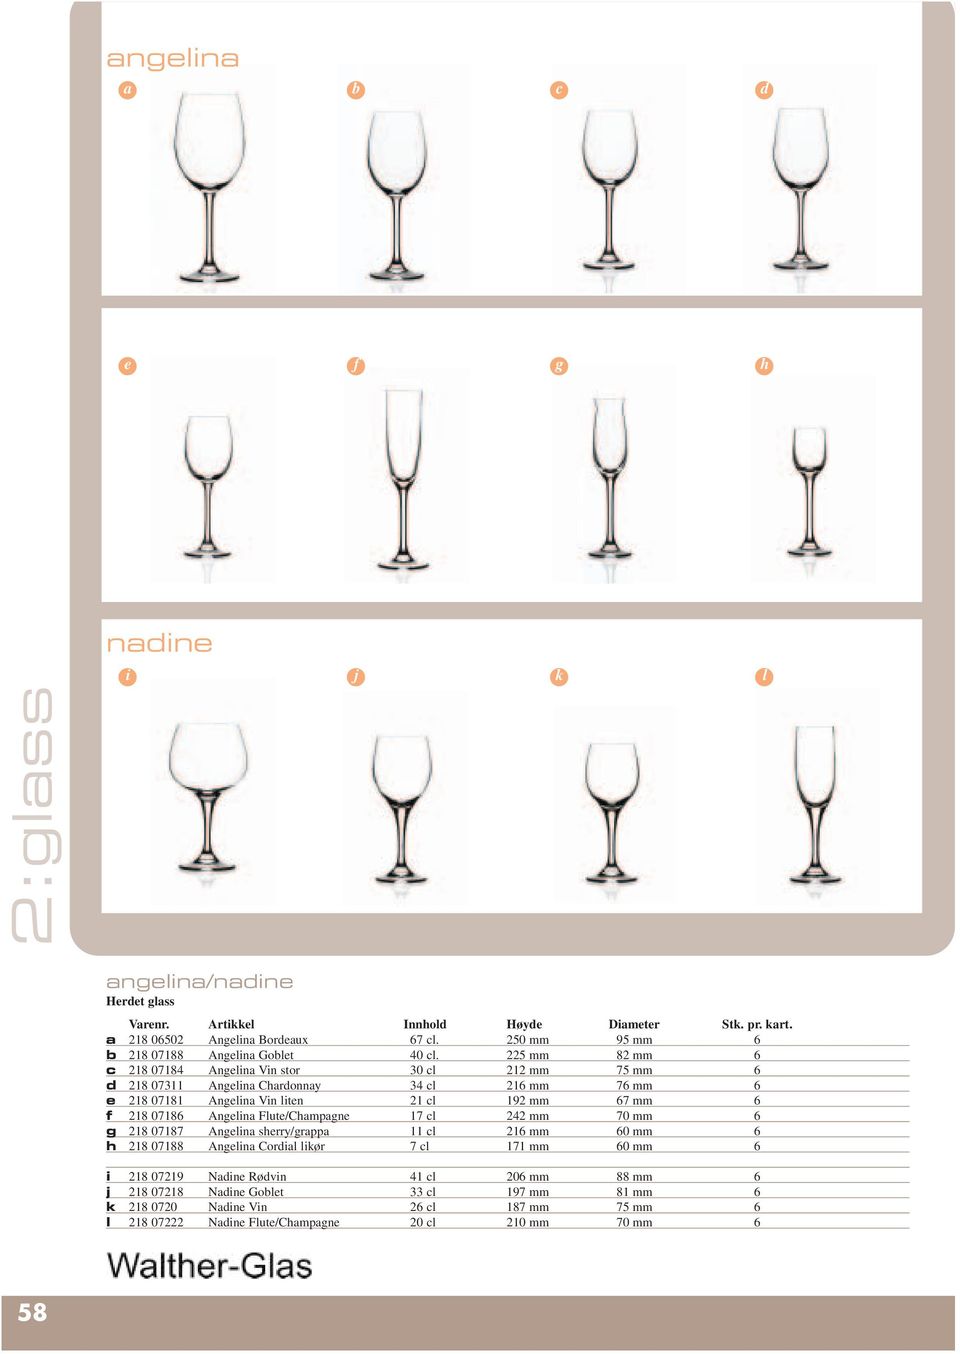 218 07186 Angelina Flute/Champagne 17 cl 242 mm 70 mm 6 g 218 07187 Angelina sherry/grappa 11 cl 216 mm 60 mm 6 h 218 07188 Angelina Cordial likør 7 cl 171 mm 60 mm 6 i 218